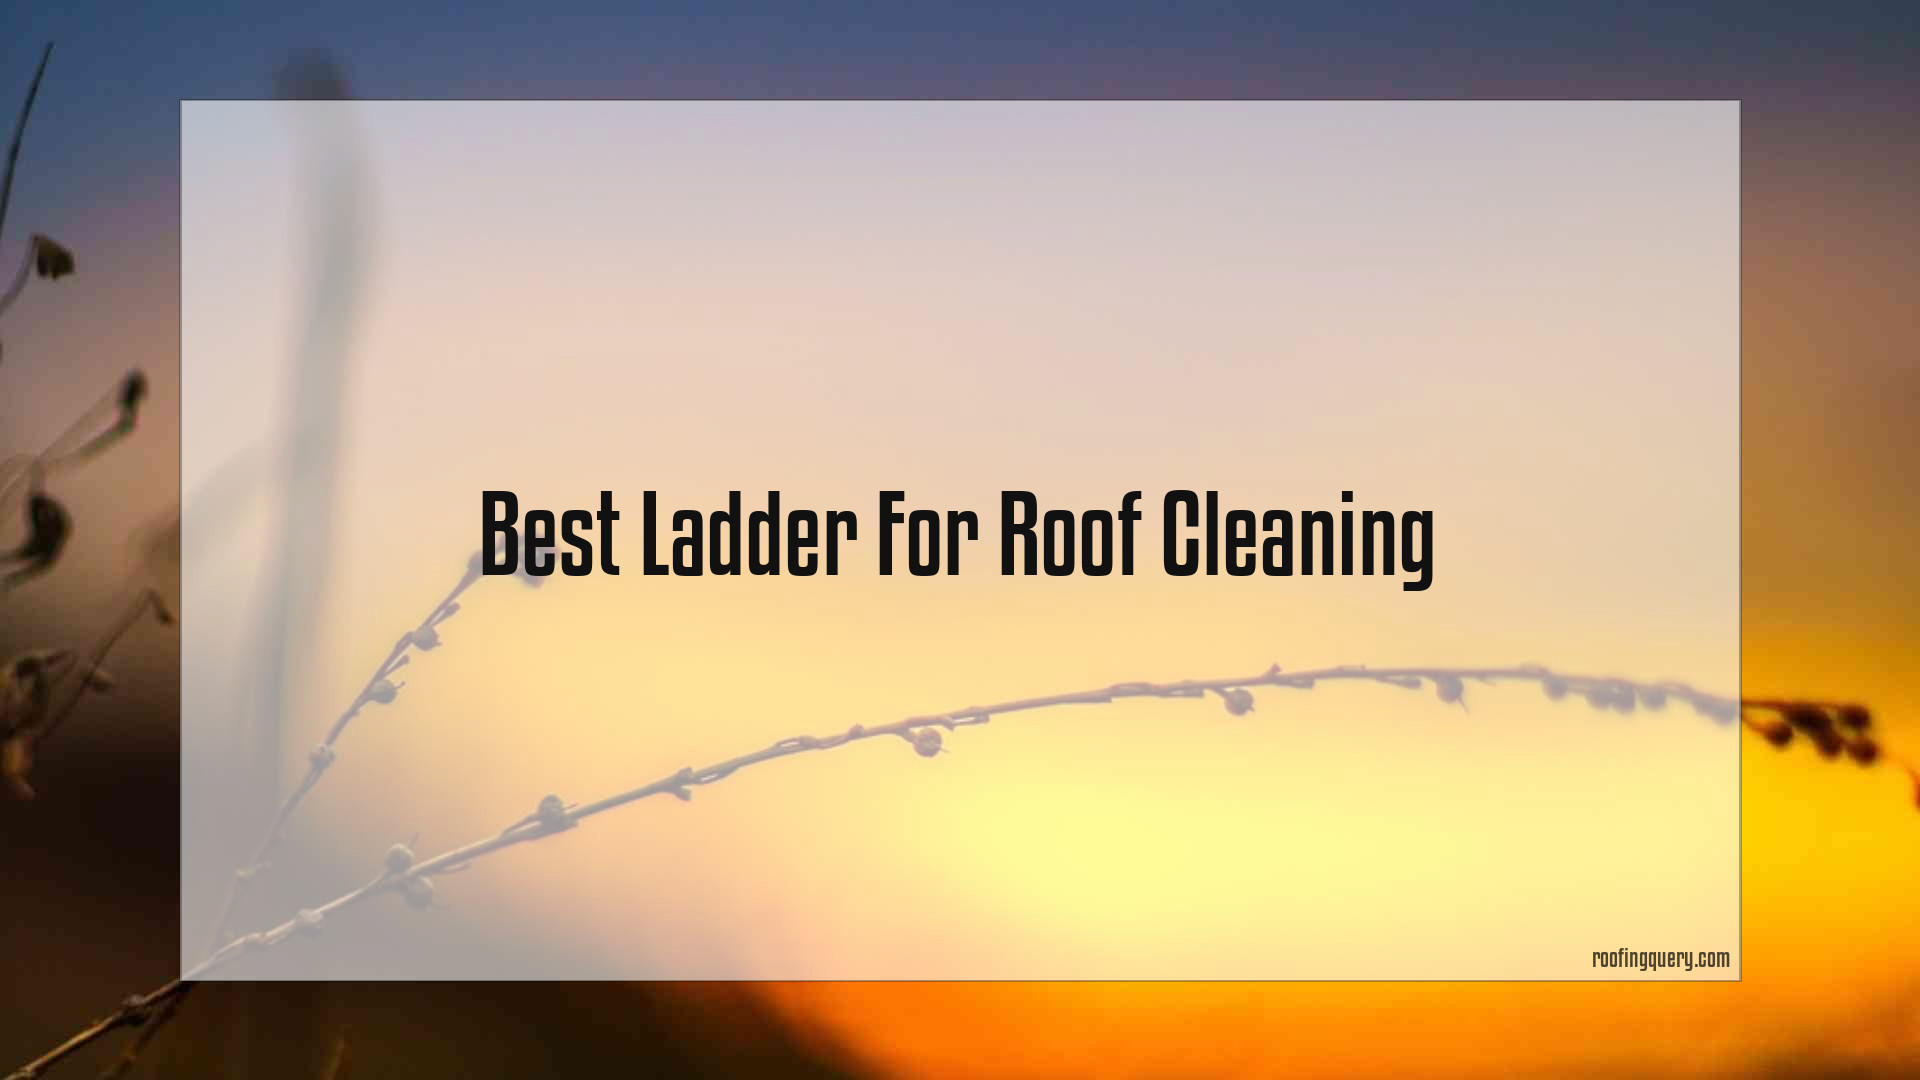 Best Ladder For Roof Cleaning